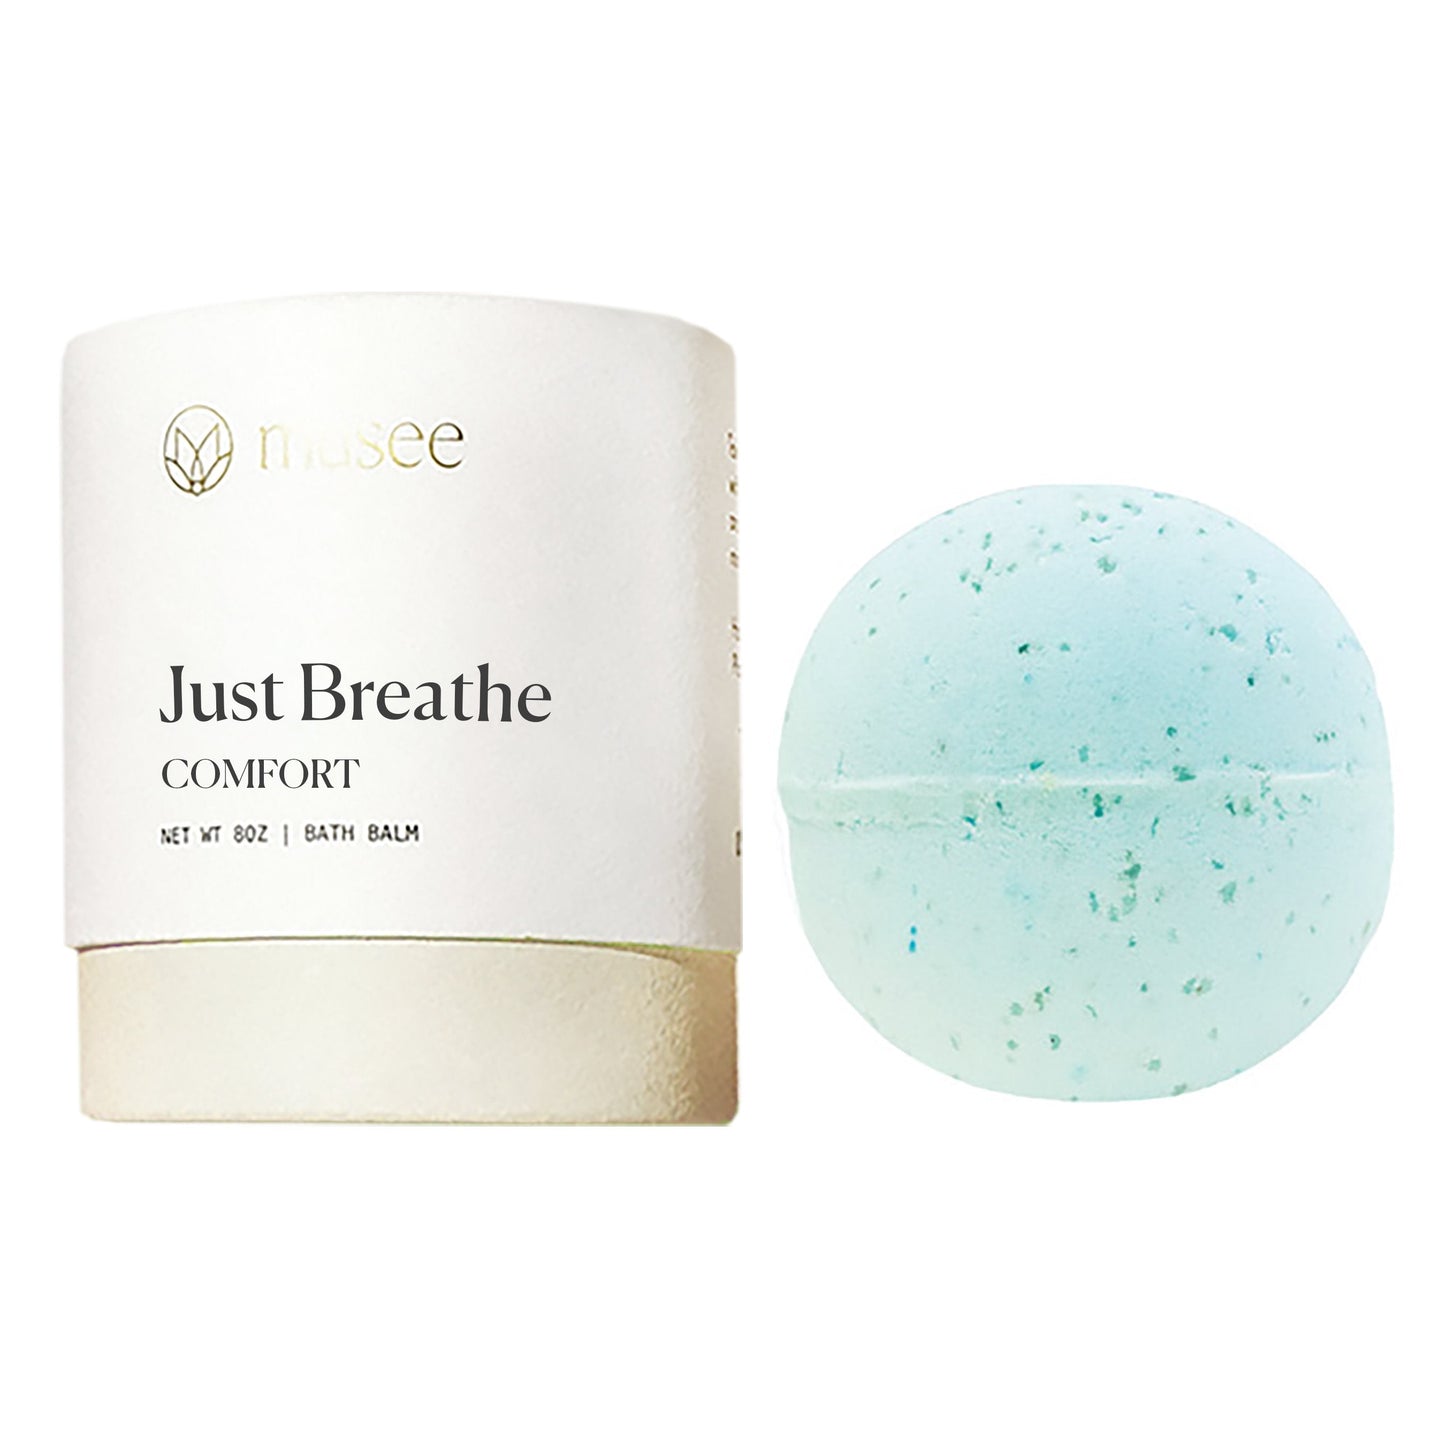 Musee Therapy Bath Balm Comfort - Just Breathe